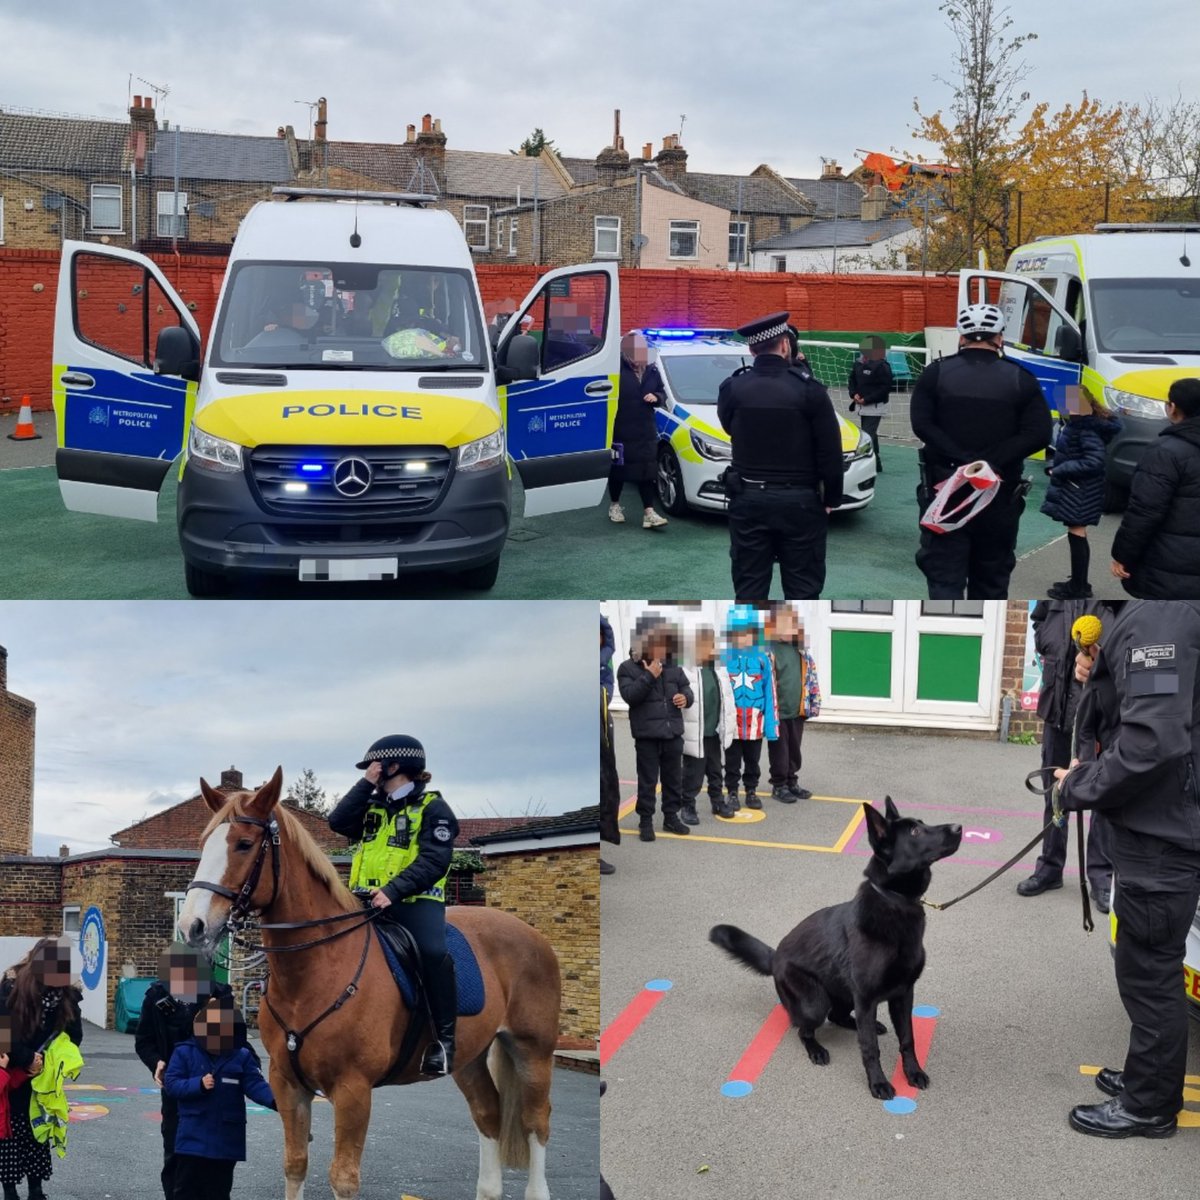 Officers from AS-STT & CVU assisted in #RoadSafetyWeek at @HollydaleSchool @MPSSouthwark with a school visit It was strong competition with @MetTaskforce but the blue lights may have won Great engagement & strong messages delivered. #CVU #STT #RoadSafety #SNT